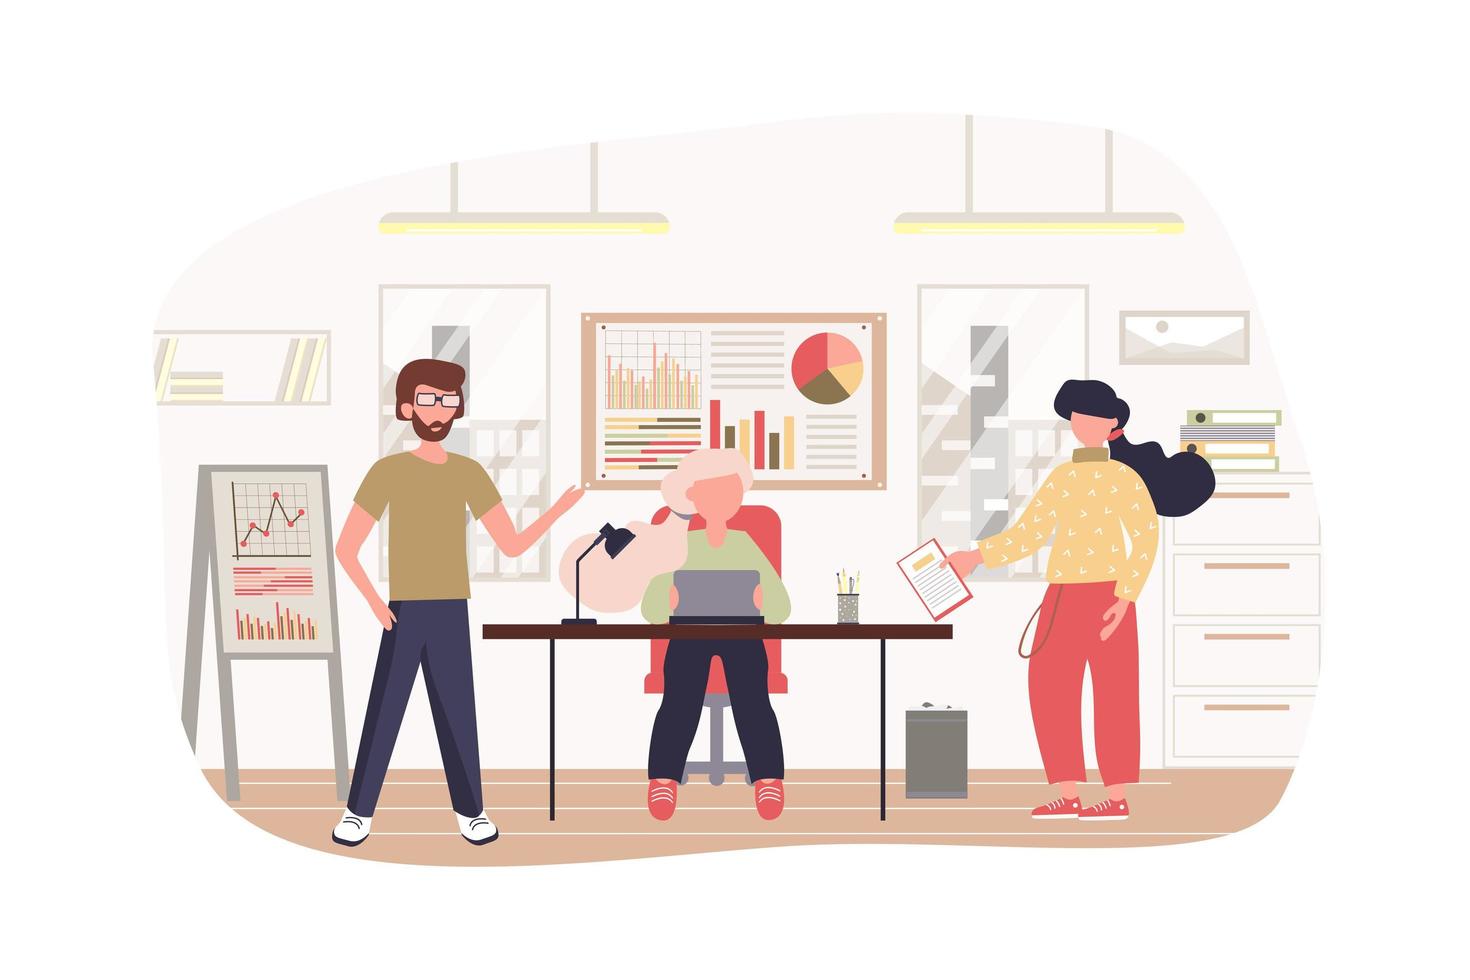 Team making marketing research modern flat concept. Marketing team analyzes chart and graph data, discusses and creates business ideas. Vector illustration with people scene for web banner design